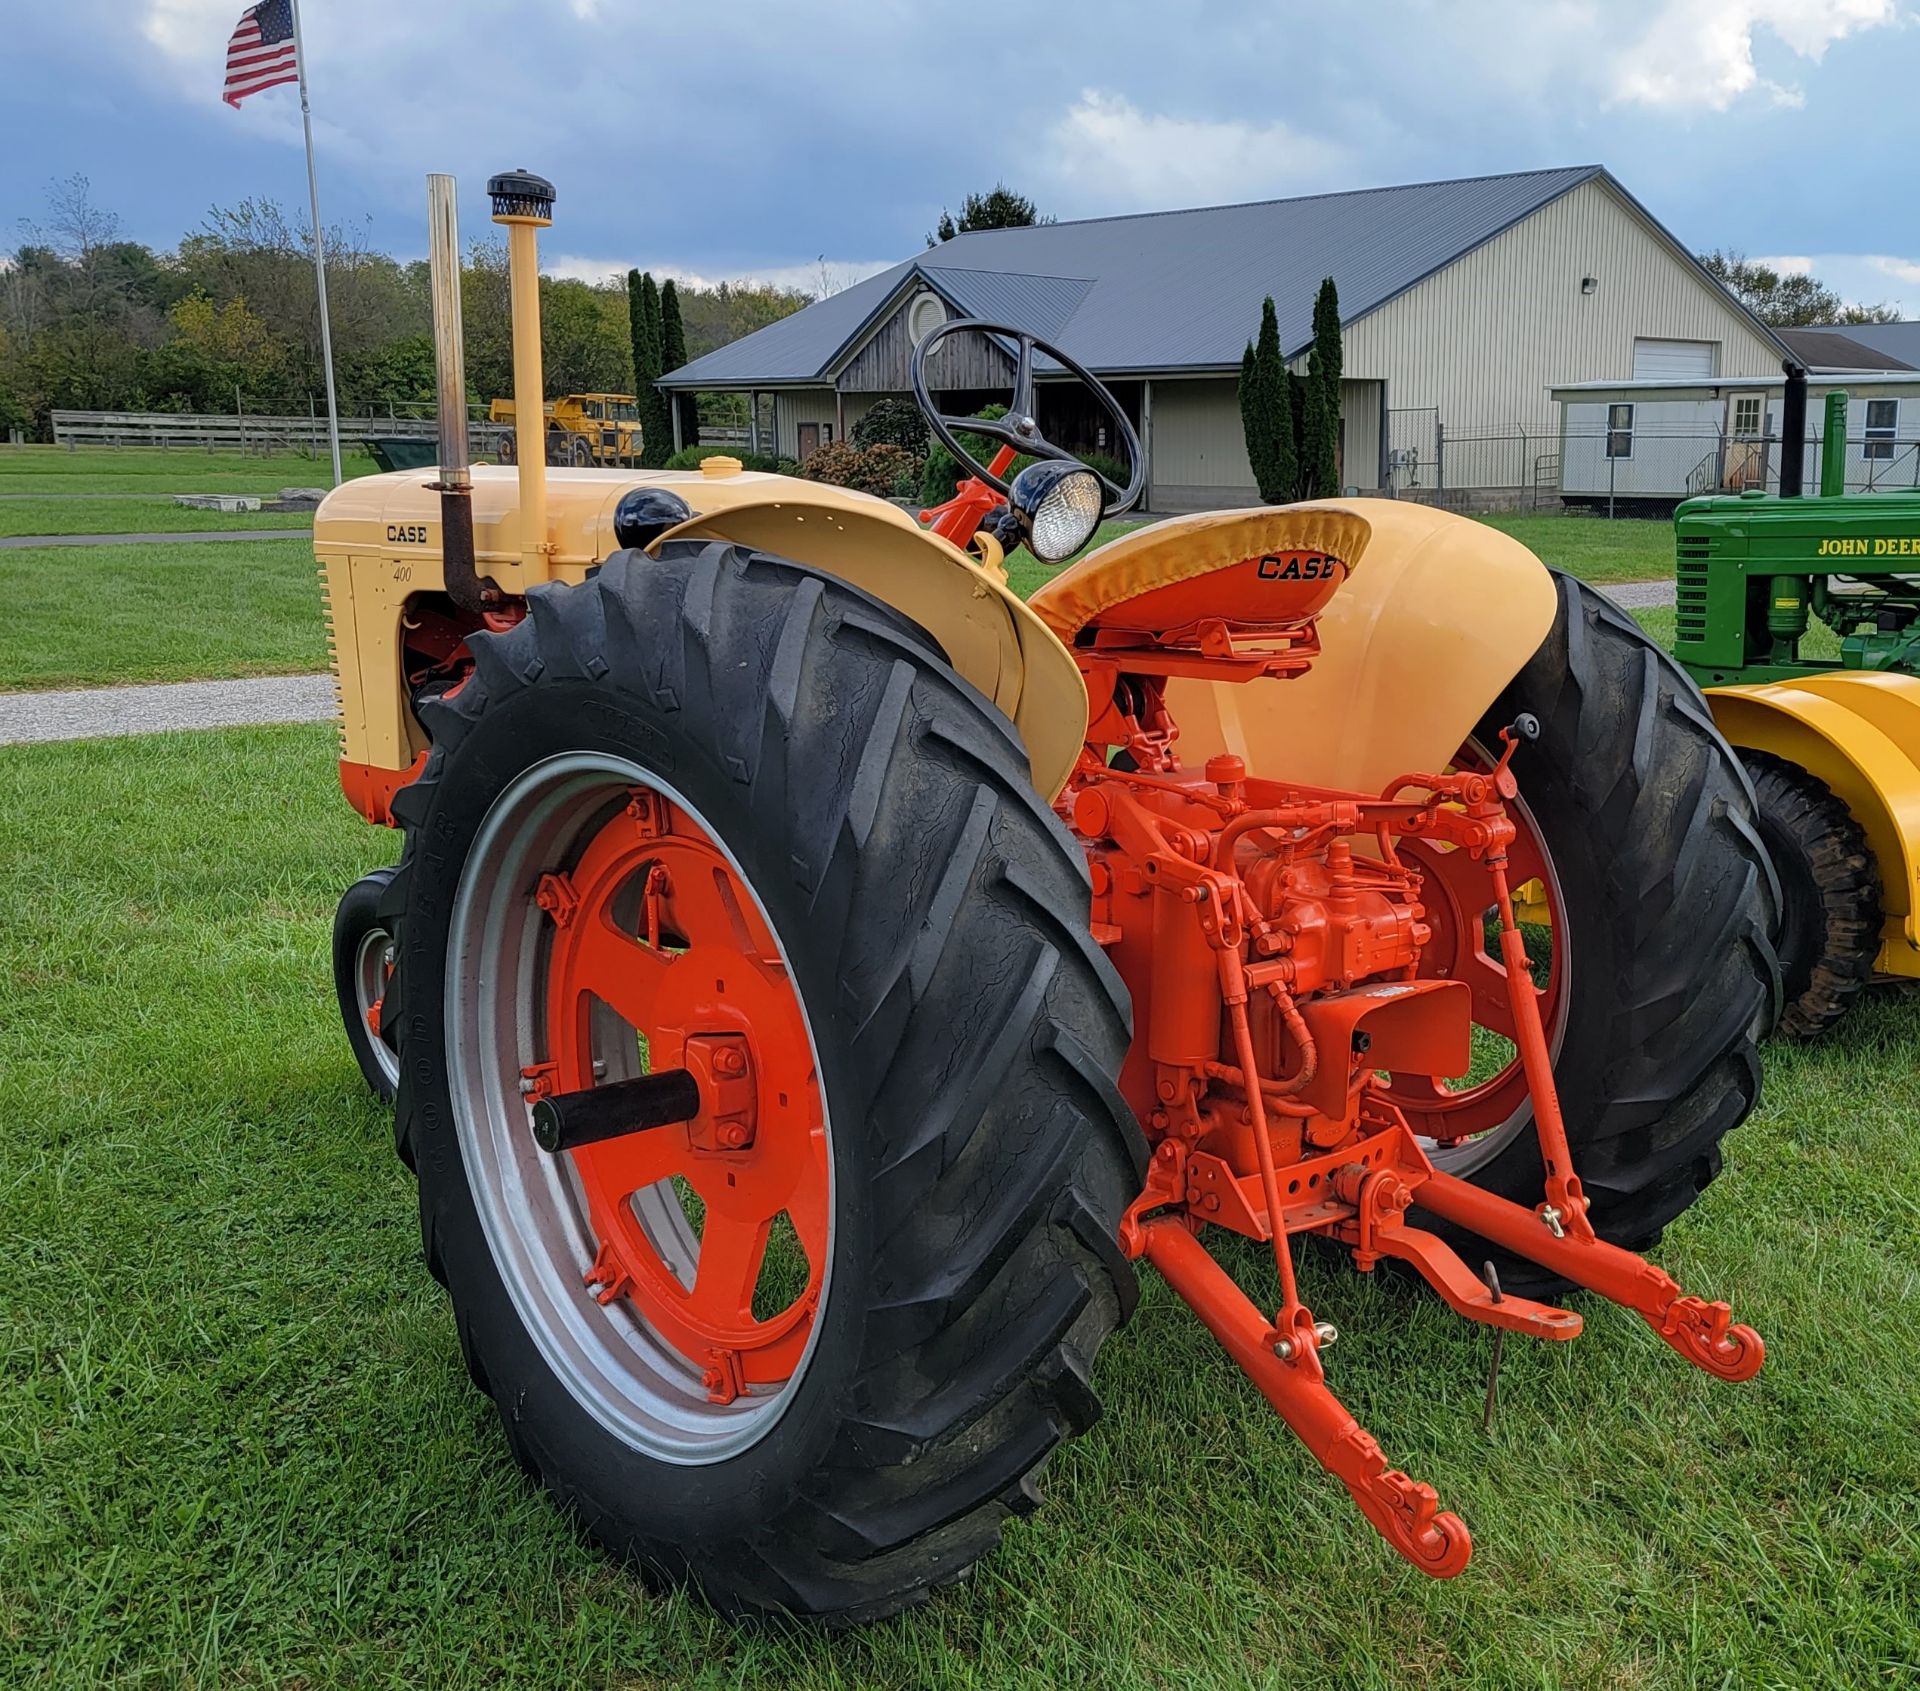 1956 Case 400 Row Crop Tractor, Model 411, s/n 8081224, Gasoline Engine, New in 1956, Restored - Image 18 of 32